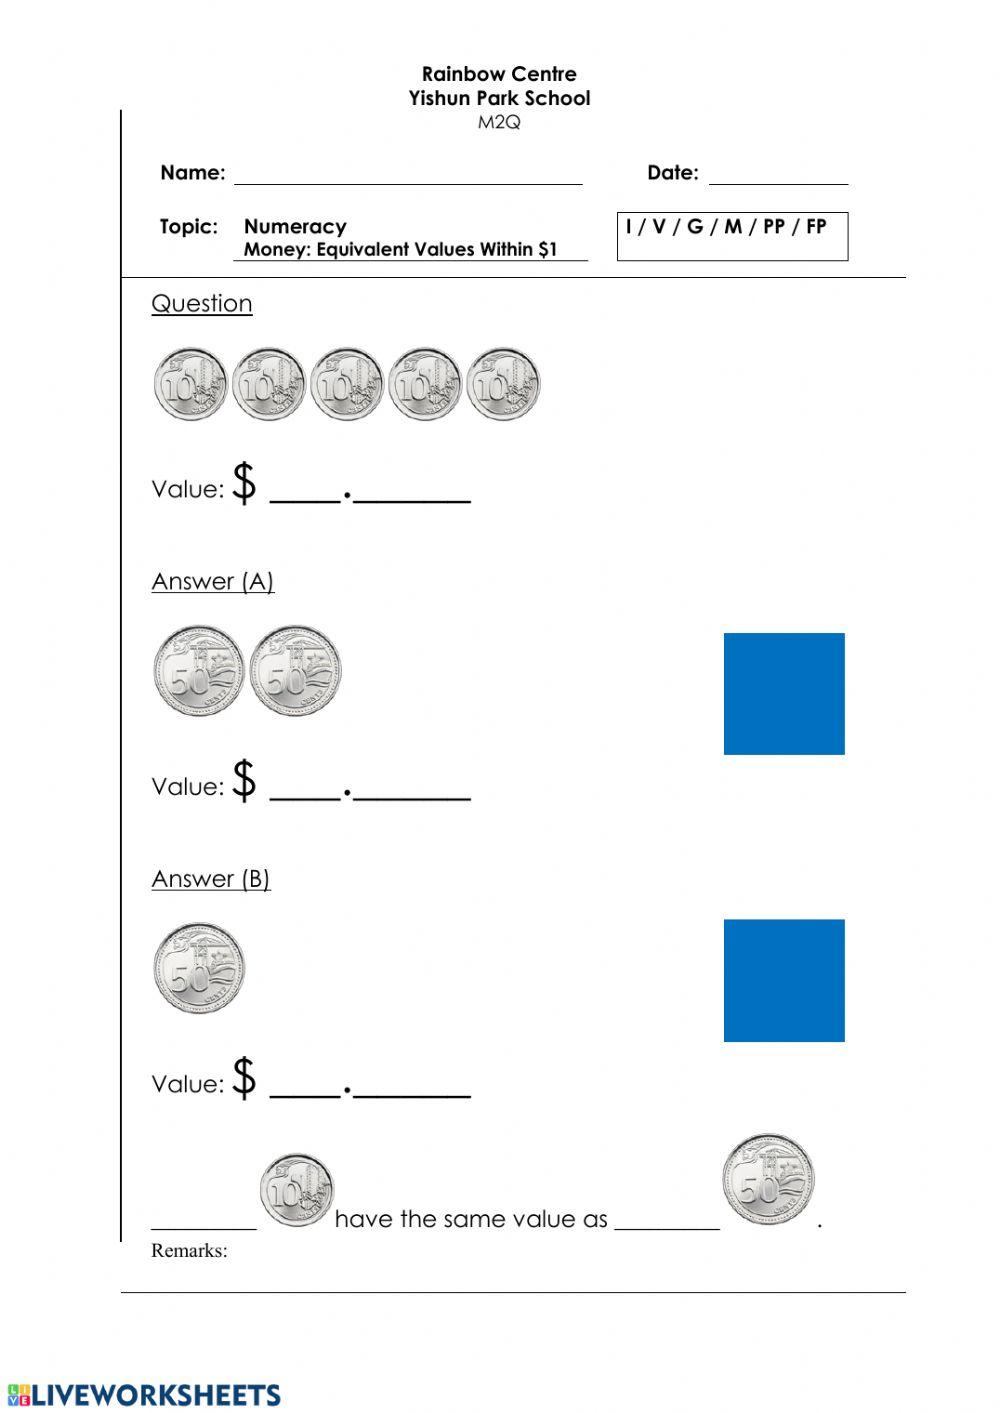 Money Writing + Tick Worksheet - Equivalent Values Within -1 D, L, Y 2 